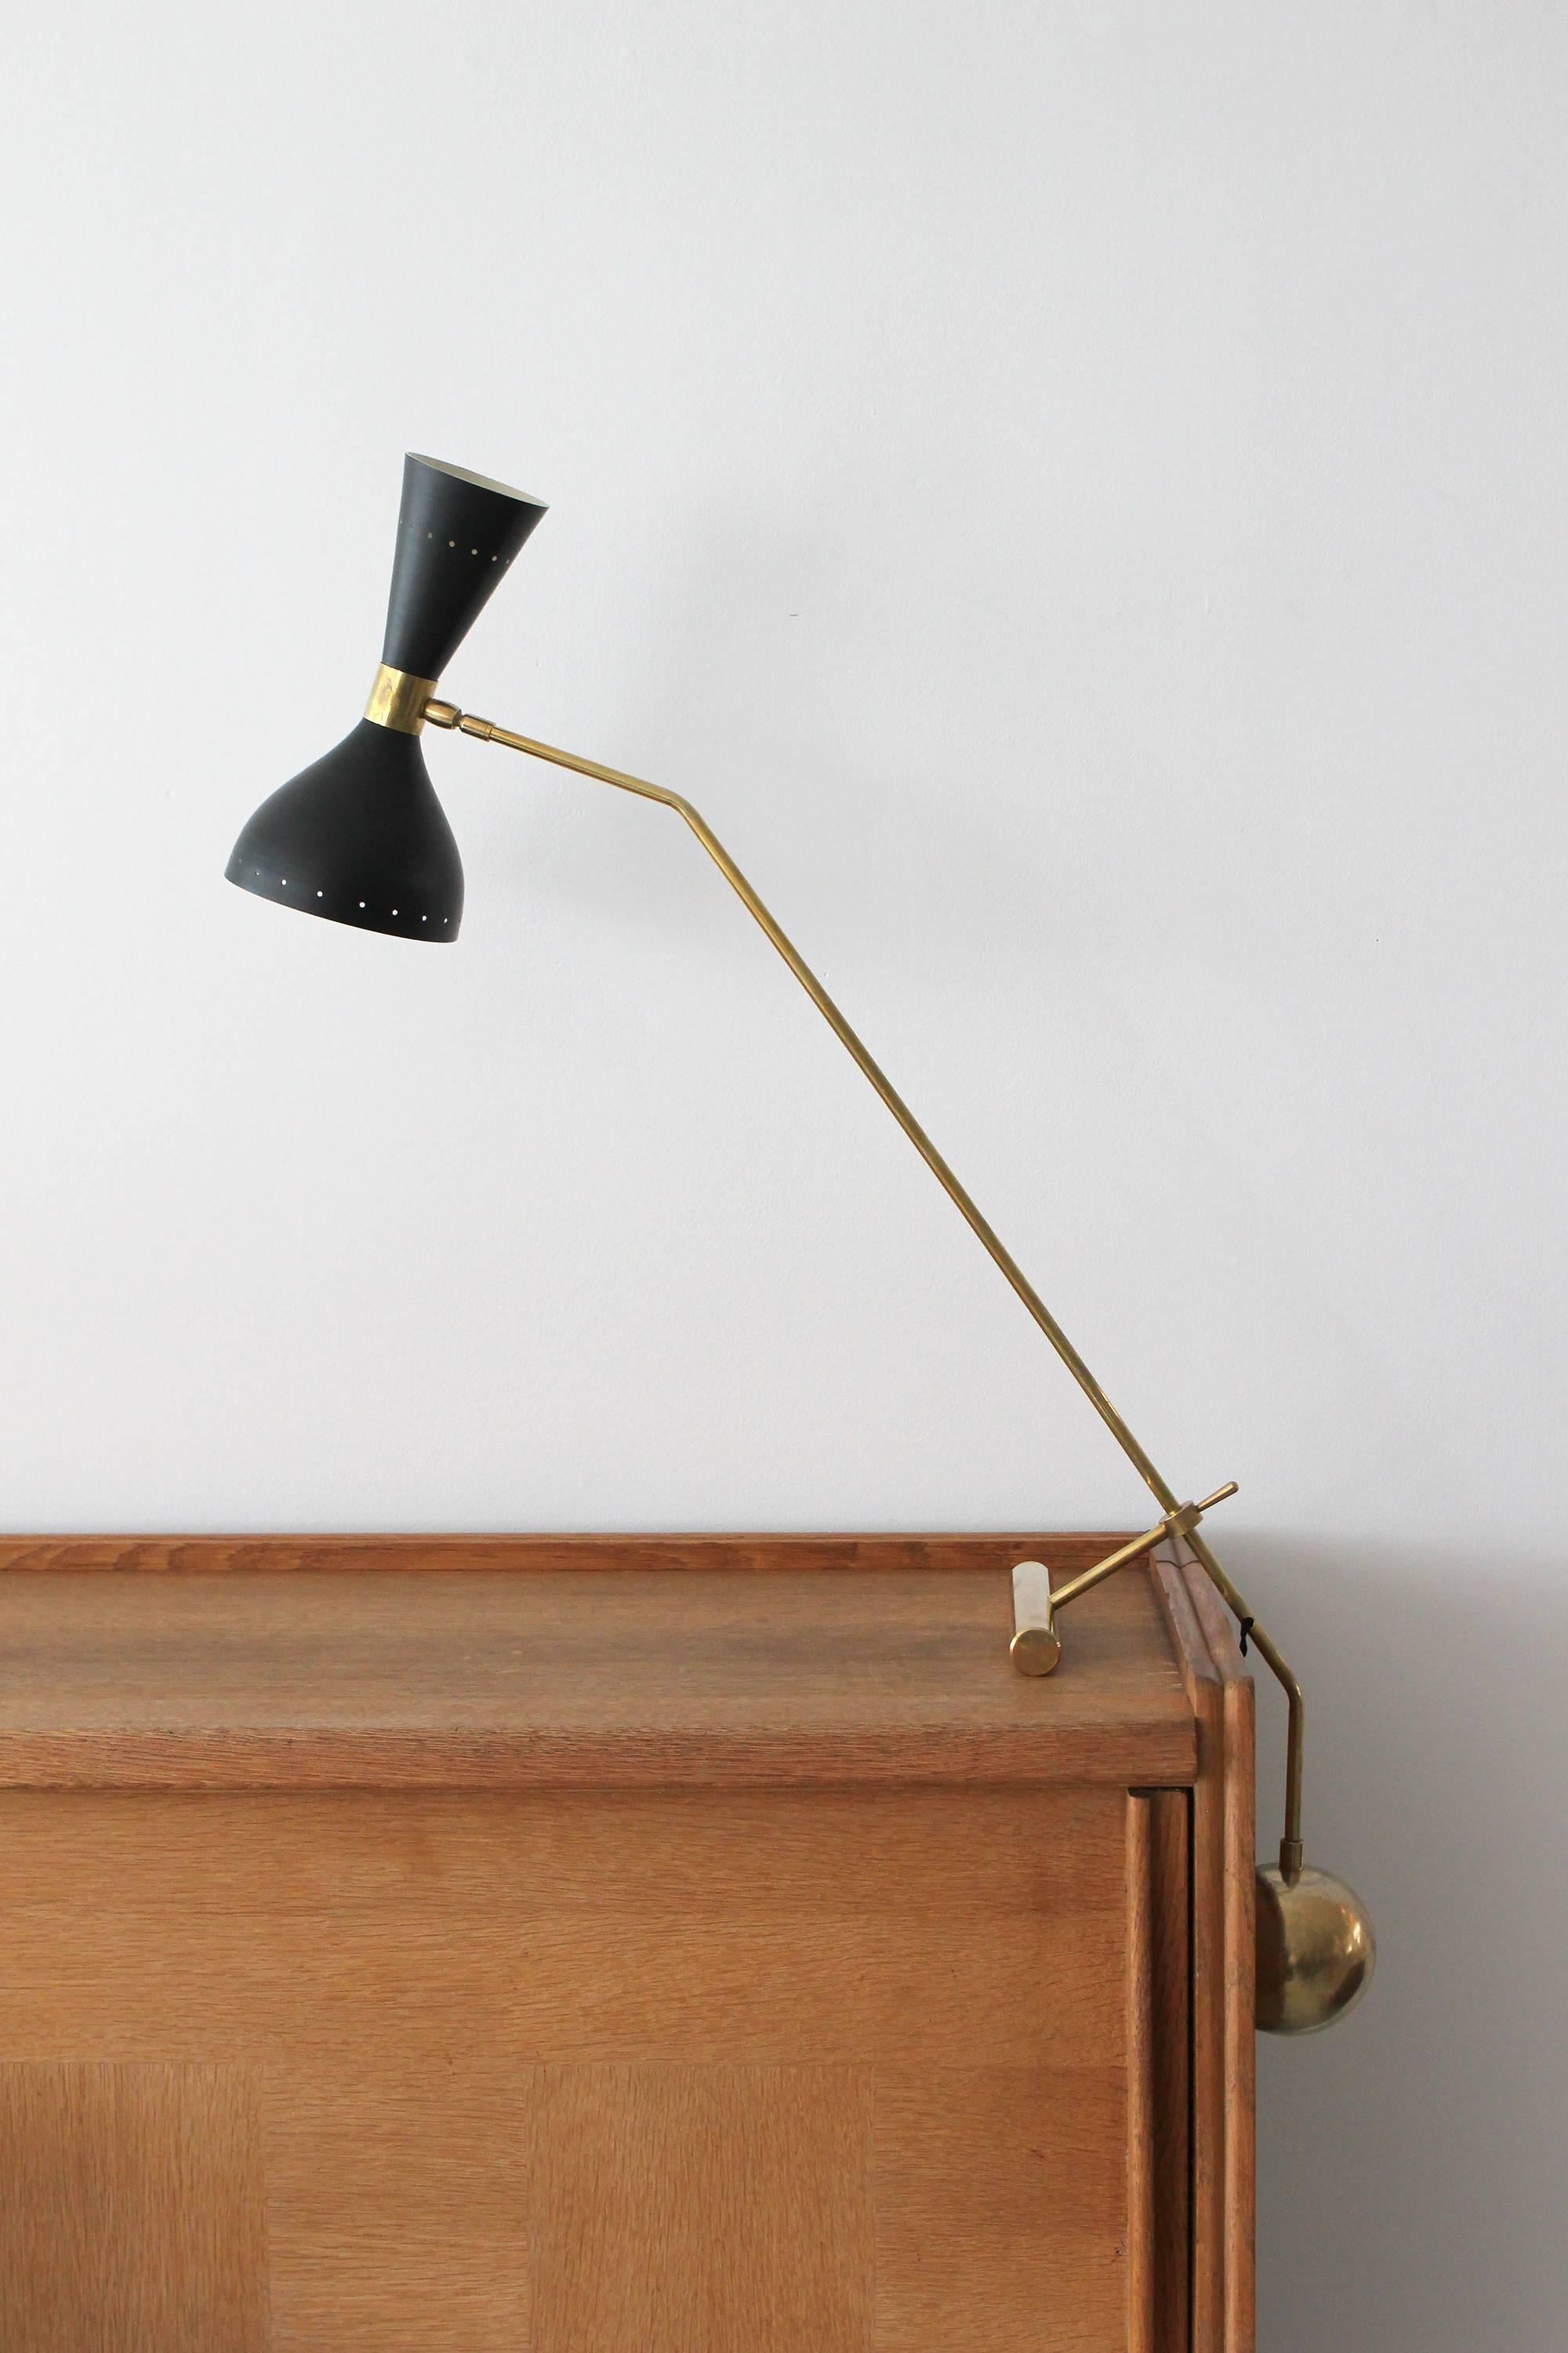 Italian desk lamp with heavy brass counterbalance weight, black cone shade that lights up and down.